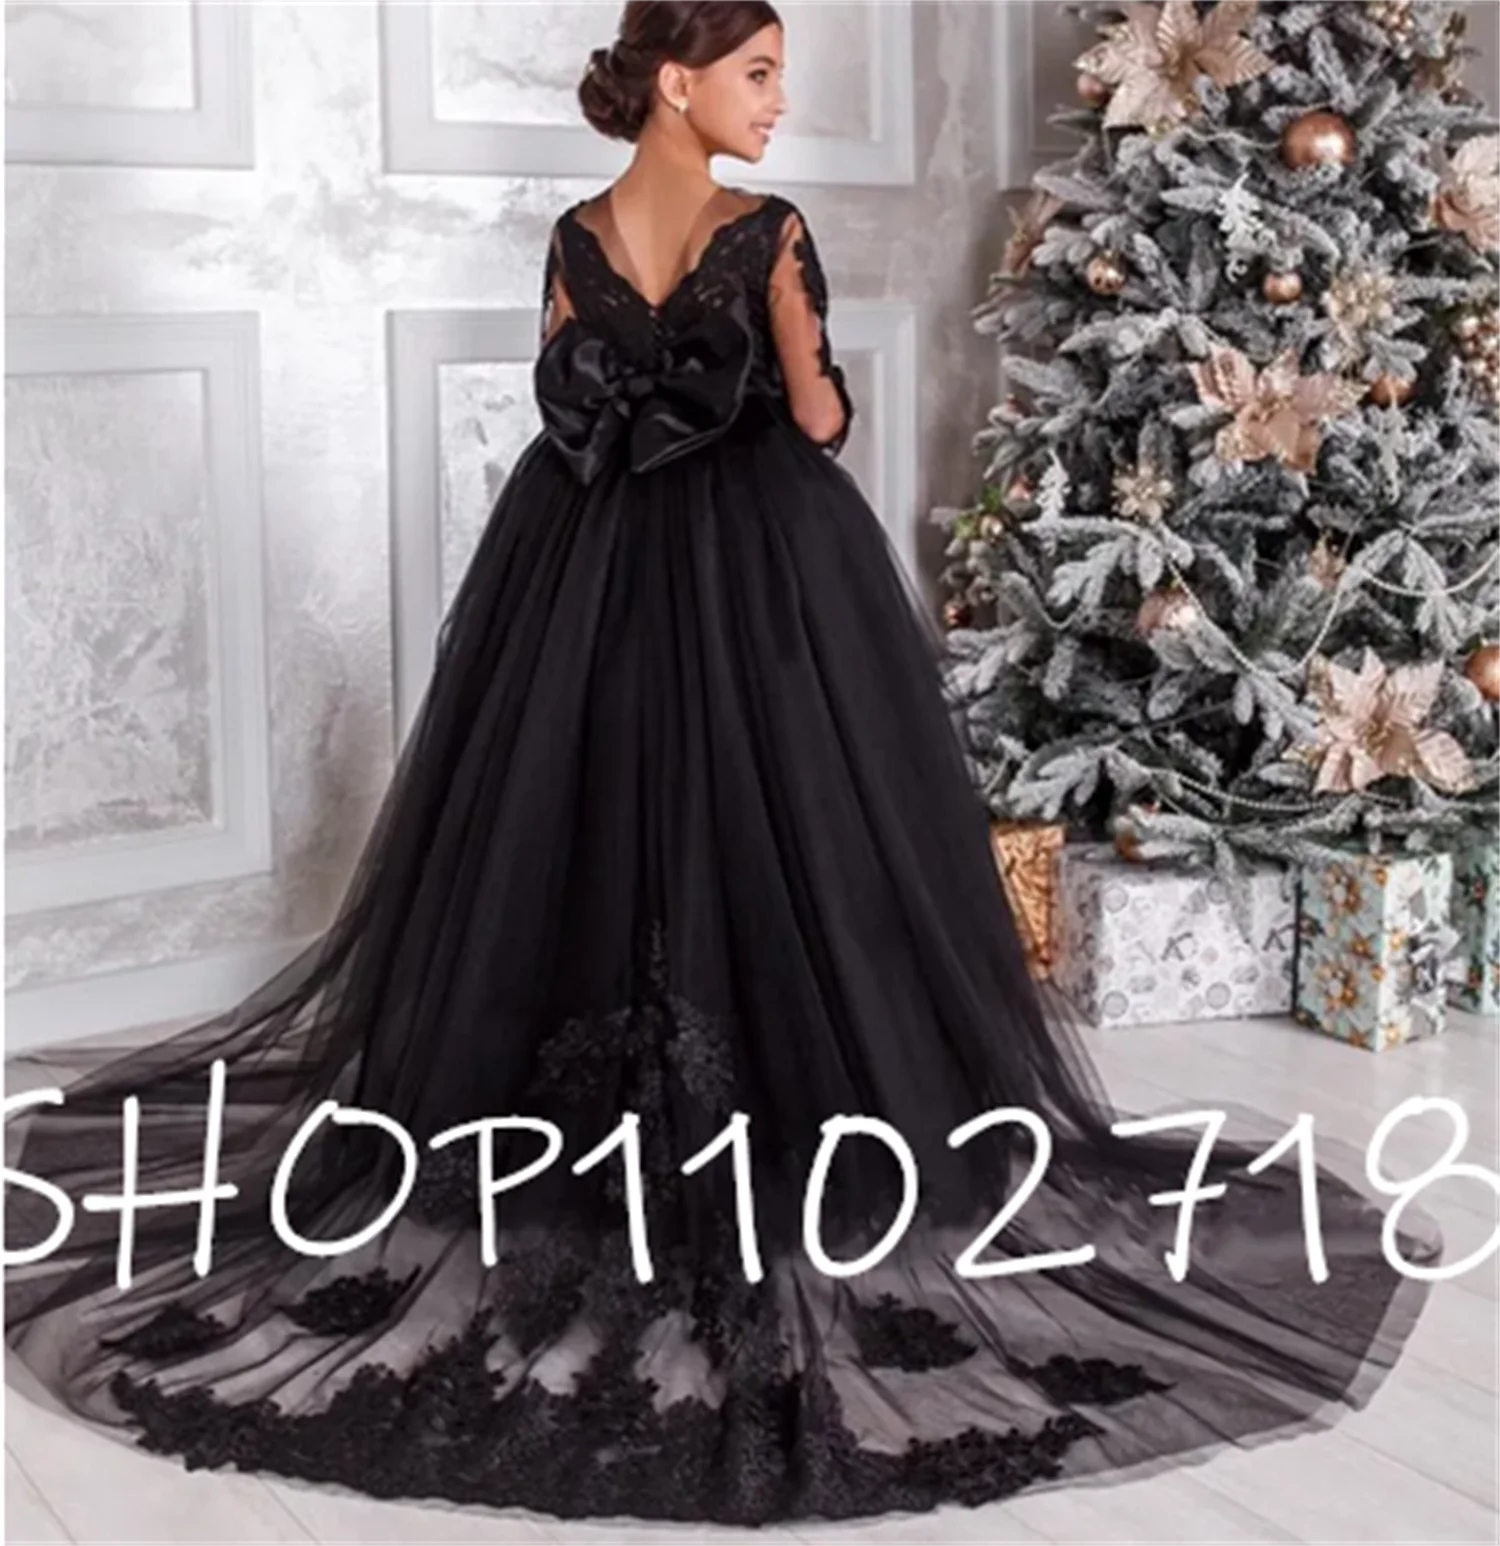 

Black Tulle Princess Flower Girl Dress Sheer Neck Applique Lace Long Sleeves Kid First Communion Dress Size 1-16Y